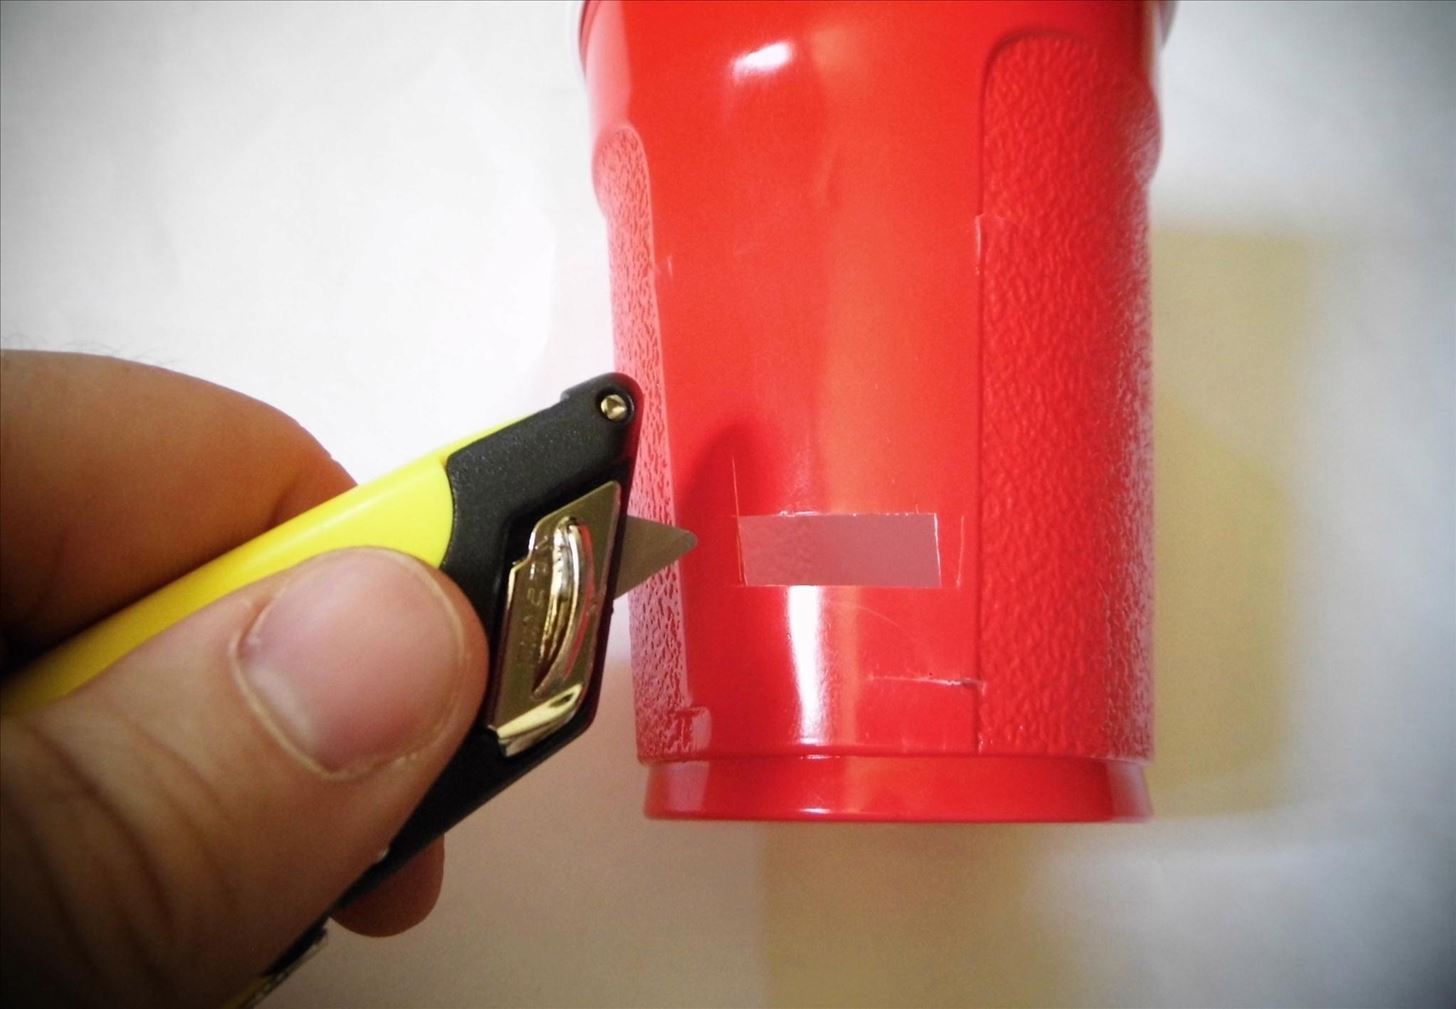 Amp Up Your Cell Phone's Sound System with a Plastic Cup